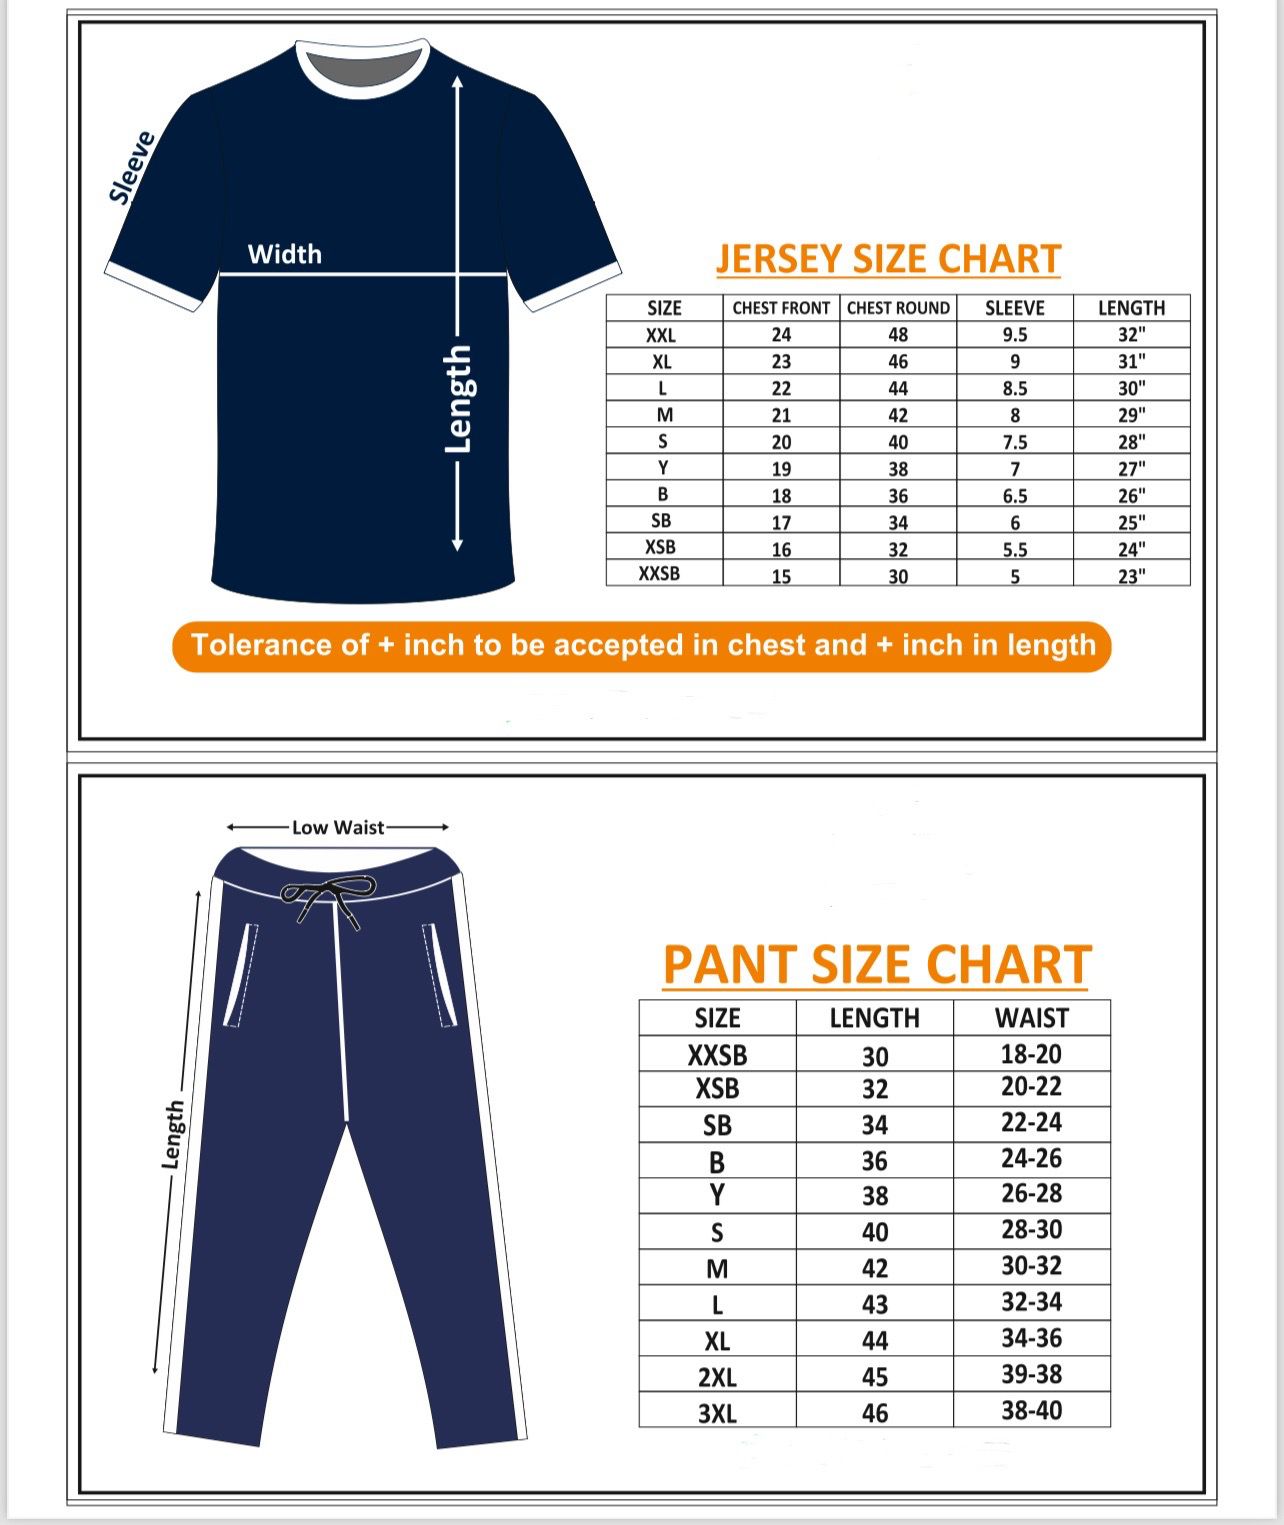 the size chart for a men's t - shirt and pants